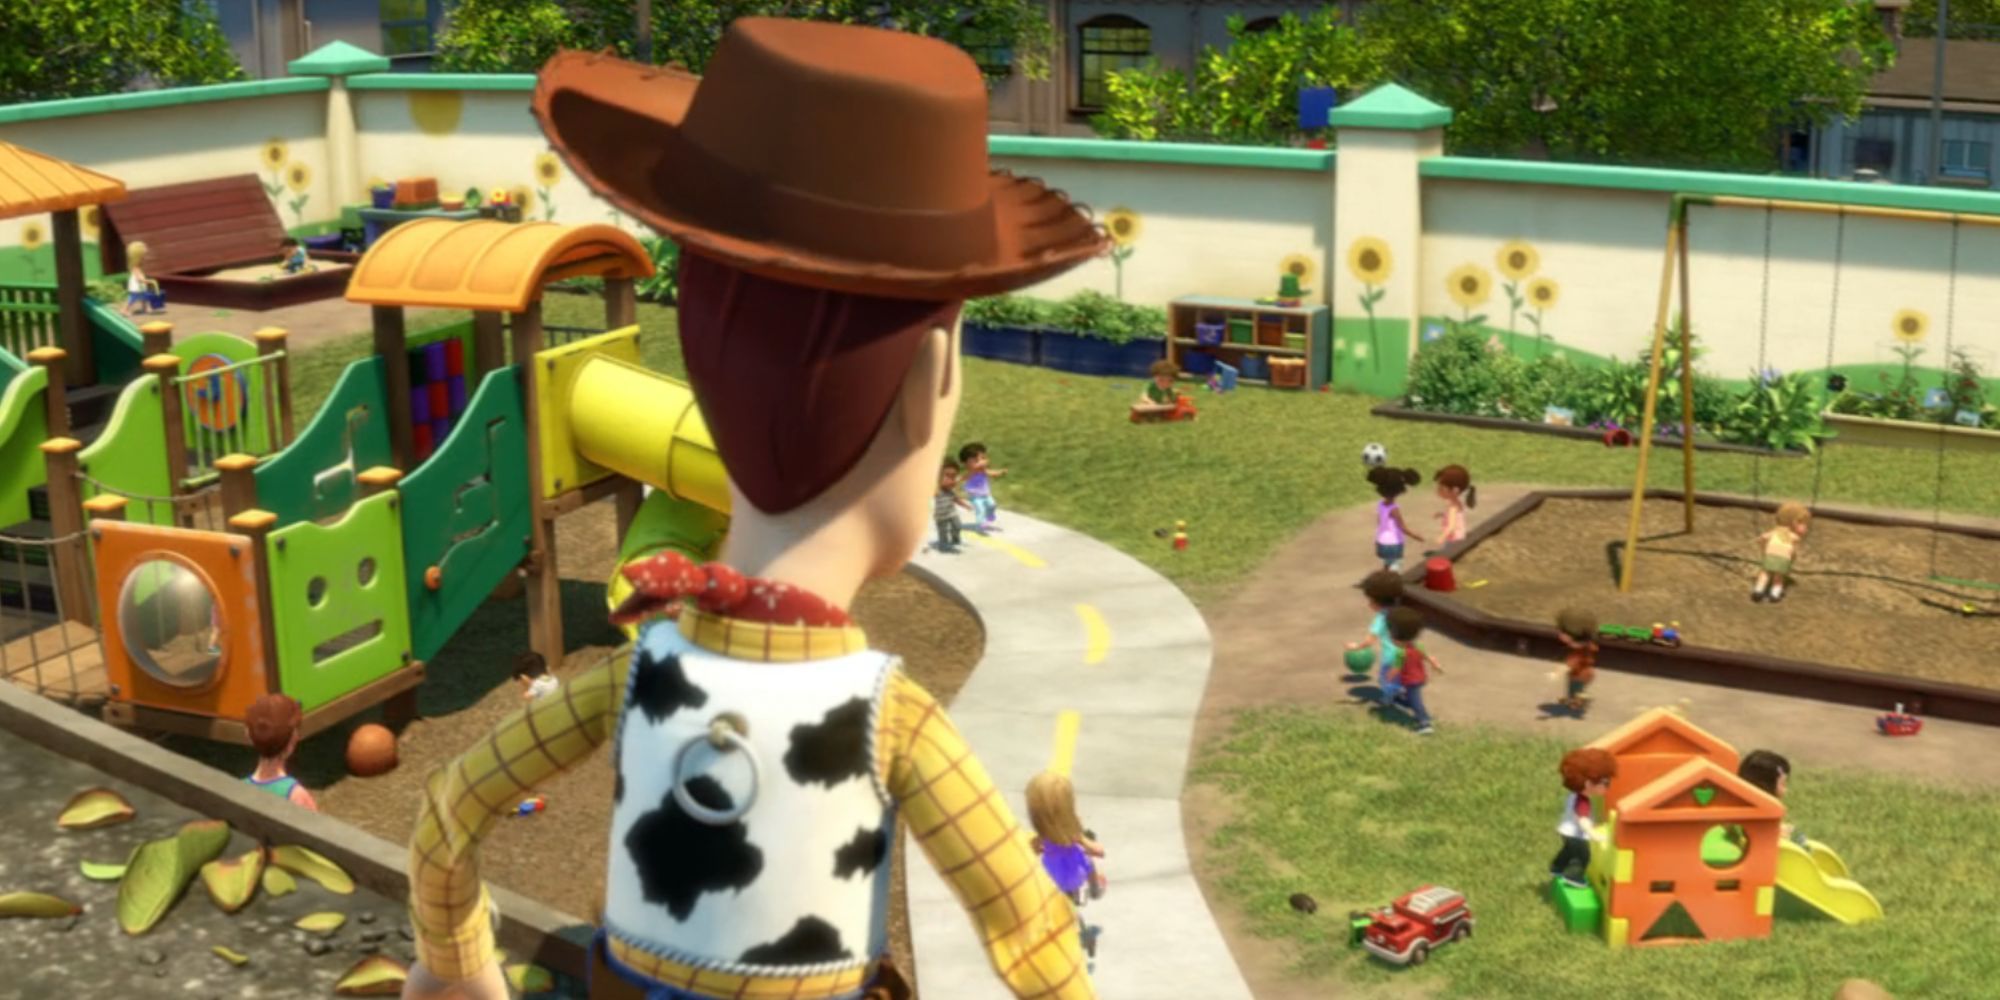 Woody looking out over a playground from the roof in Toy Story 3